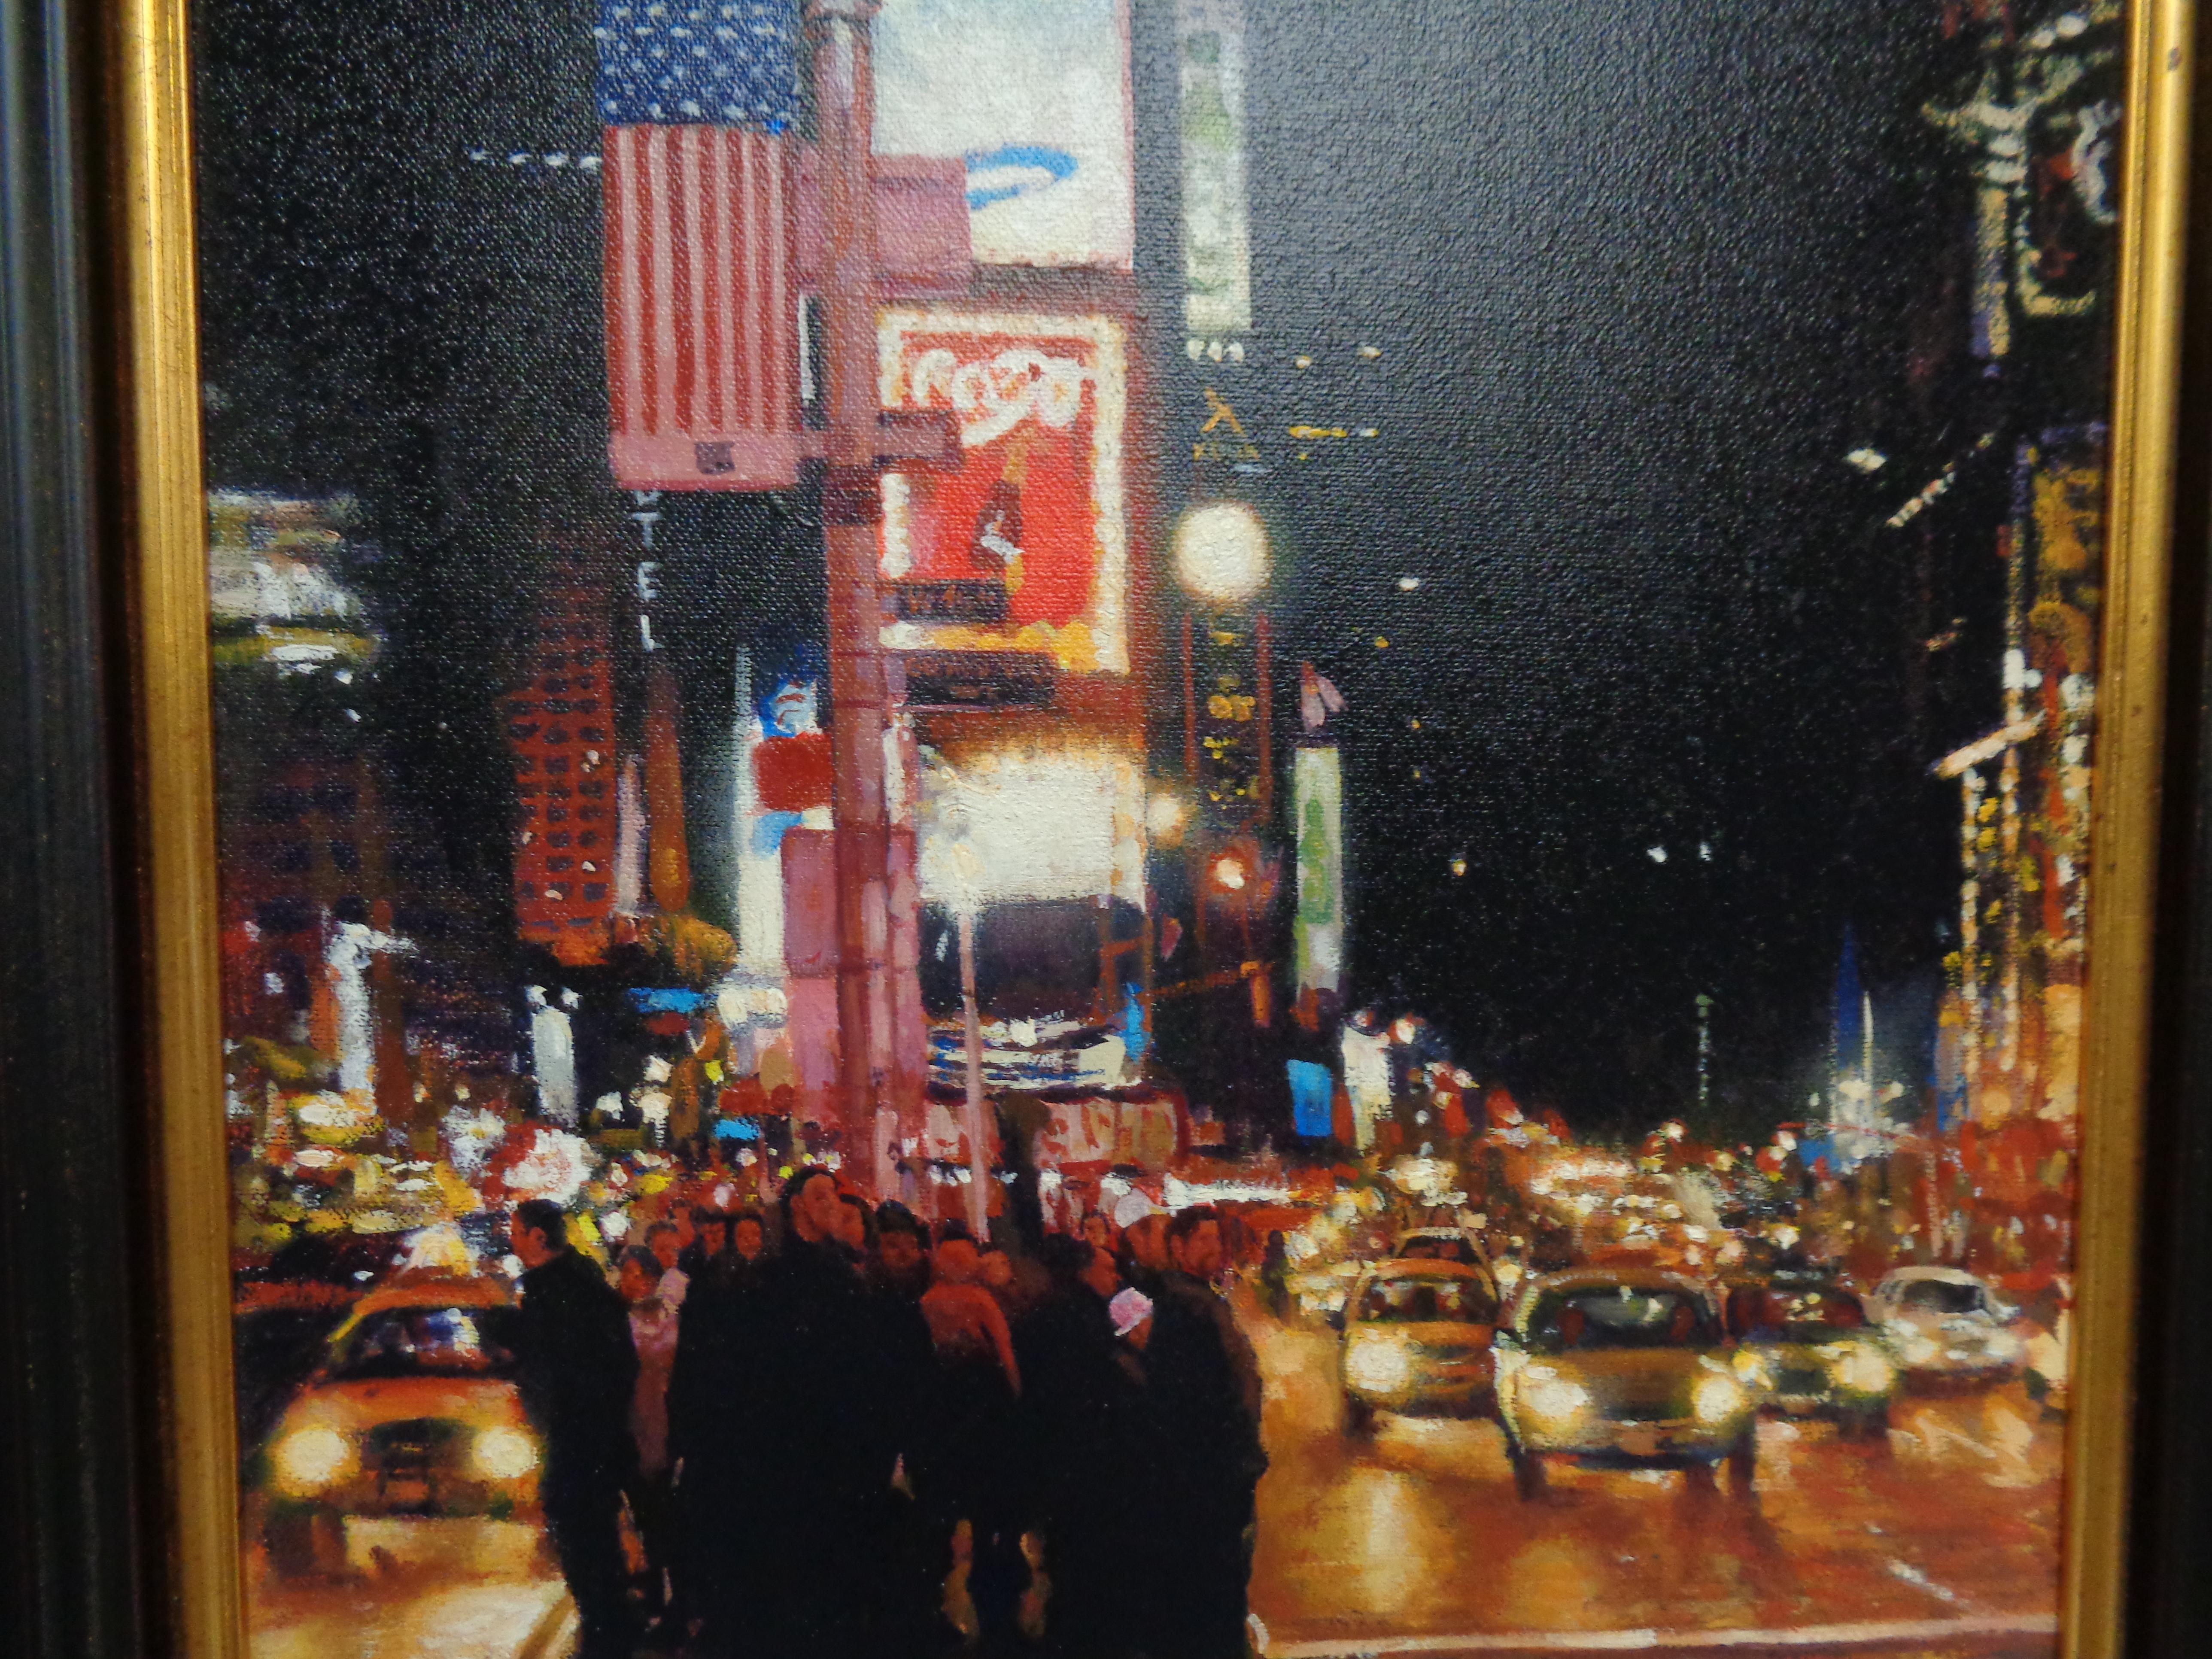  New York City Painting Times Square, Nocturne by Michael Budden  For Sale 2